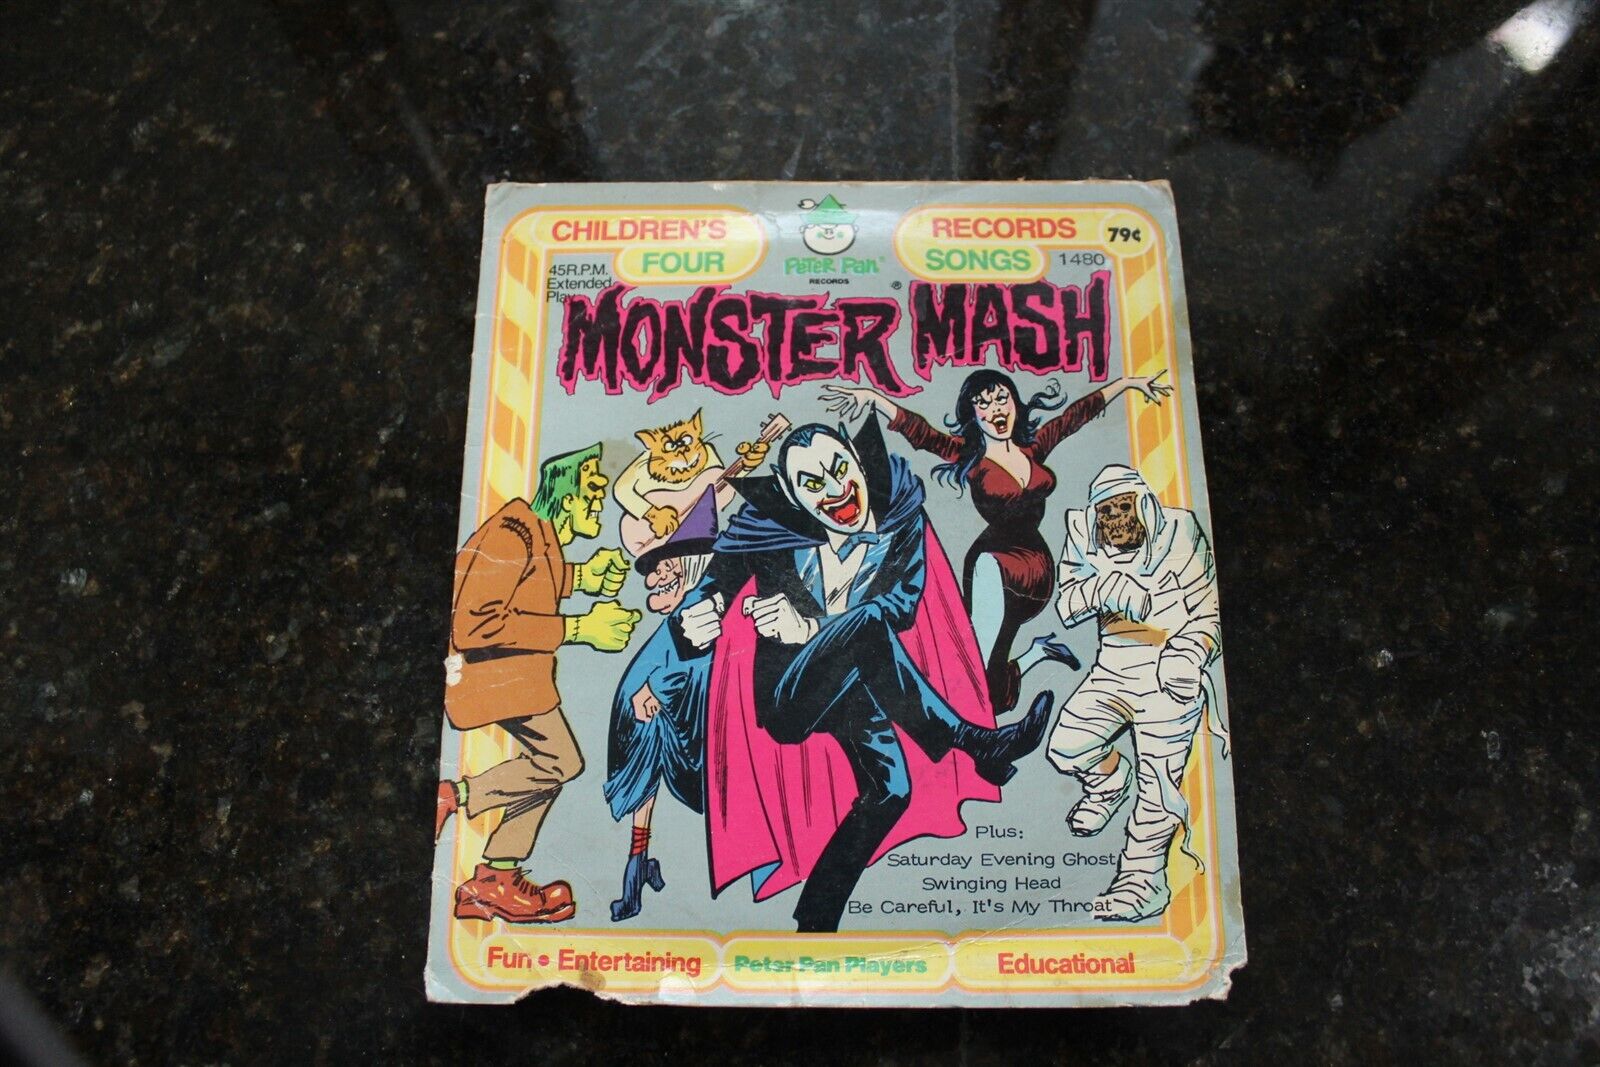 Vintage Kids Record w/ 4 Songs Monster Mash, Saturday Evening Ghost Plus More